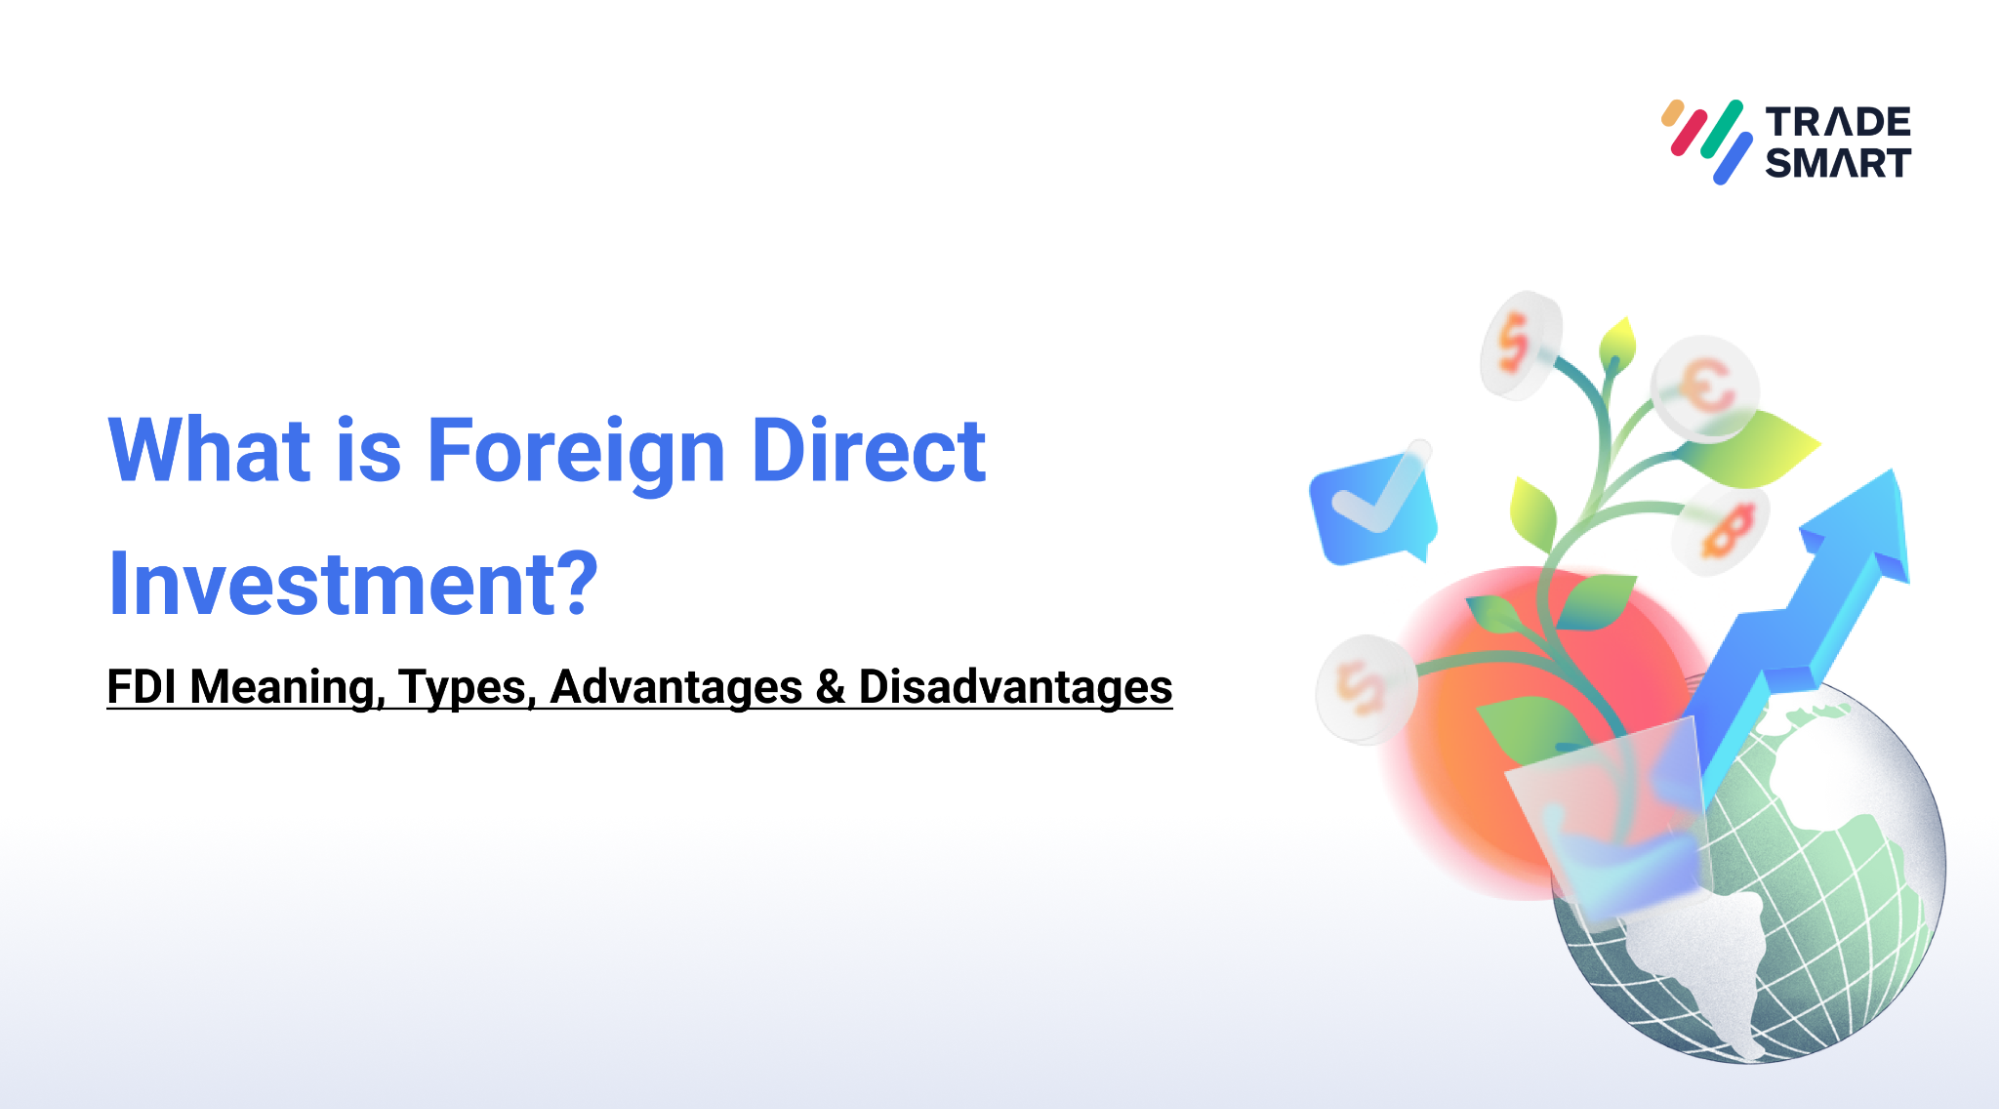 What is Foreign Direct Investment? FDI Meaning, Types, Advantages & Disadvantages